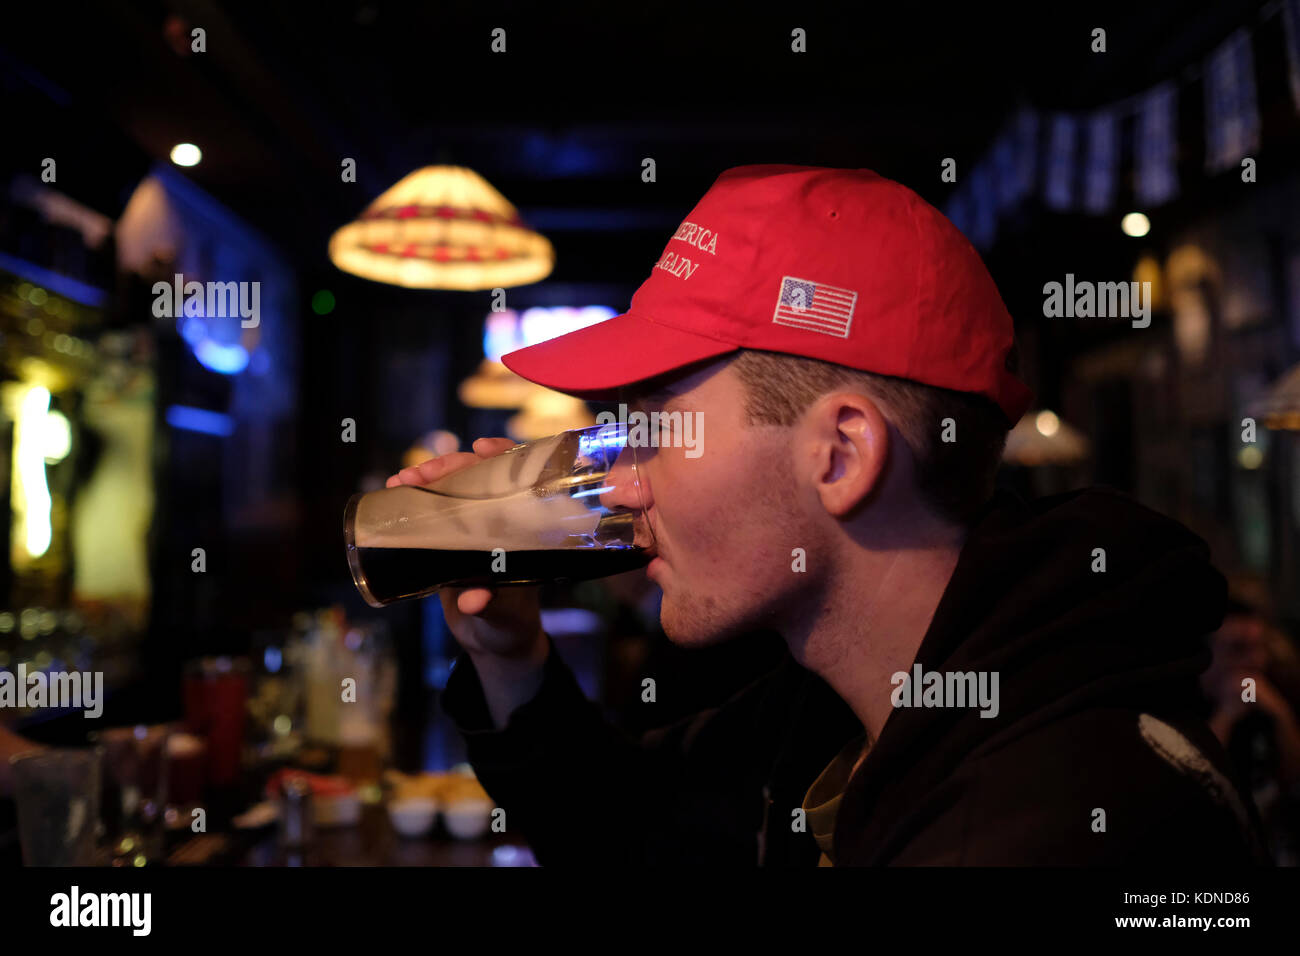 A young Israeli man drinking beer in a pub in Jerusalem and wearing the 'Make America Great Again' classic rope hat that Donald Trump used to wear during his campaign for presidency in the US. Stock Photo